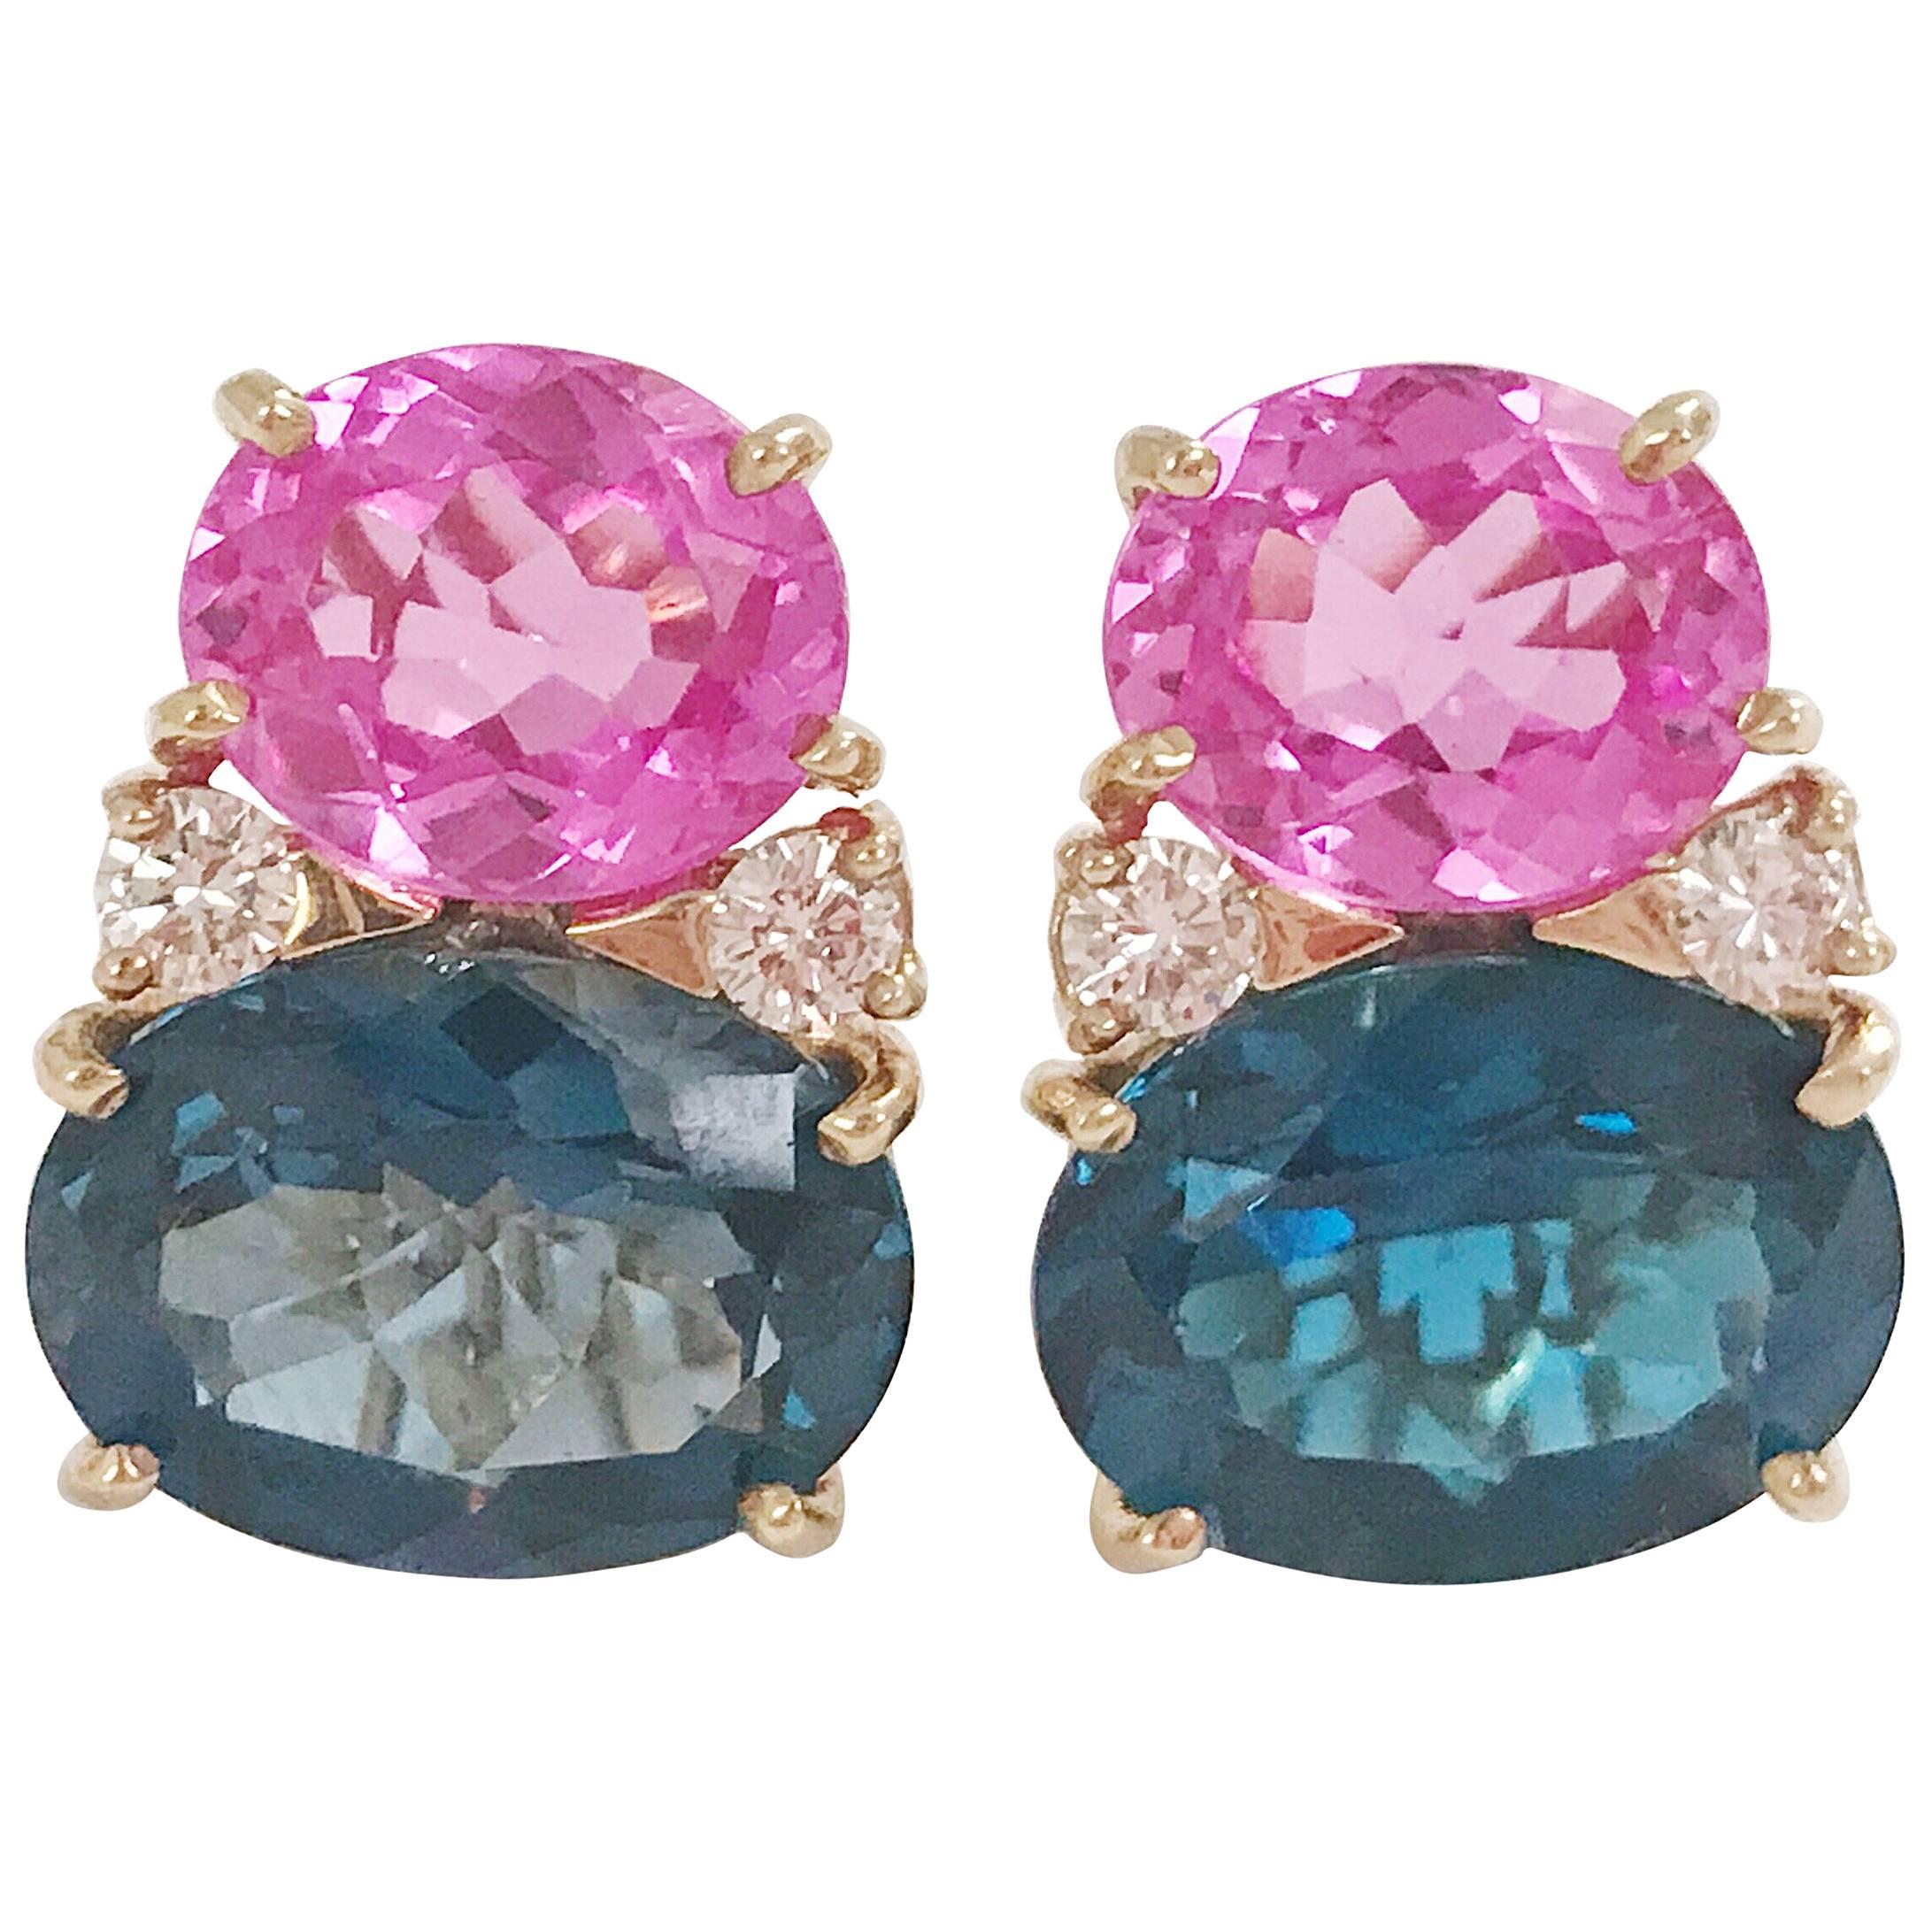 Large GUM DROP Earrings with Hot Pink and Deep Blue Topaz and Diamonds